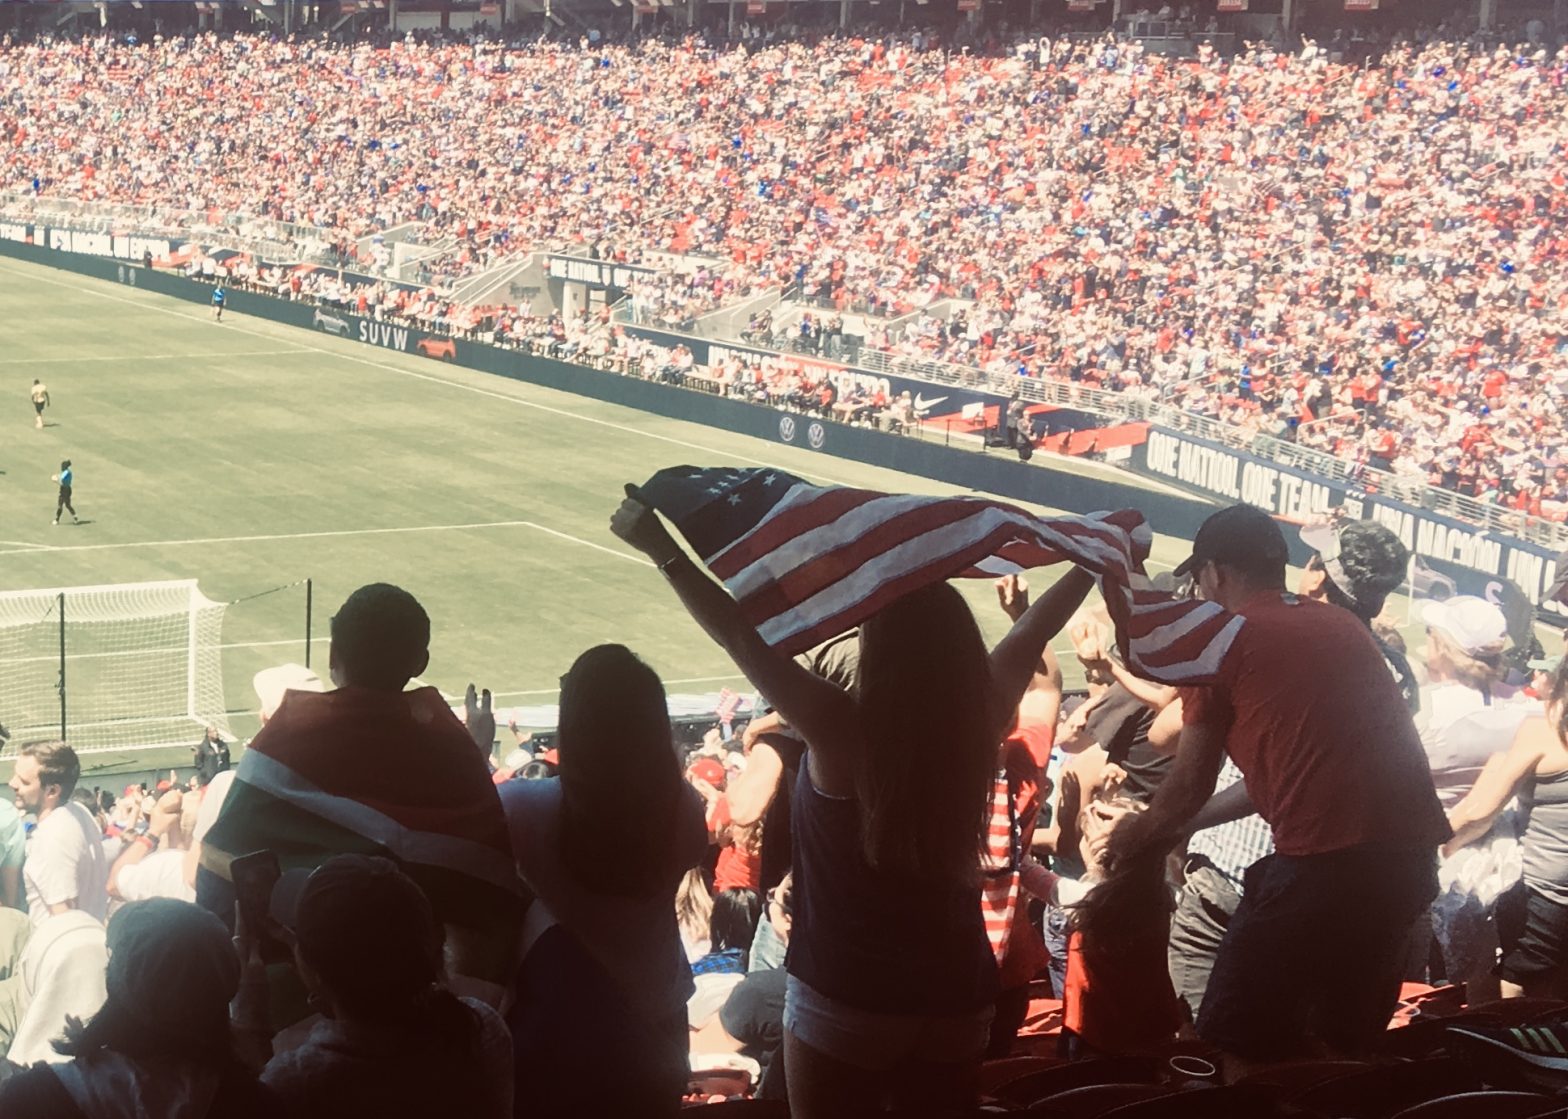 Crowd holding up U.S. flags during a soccer match